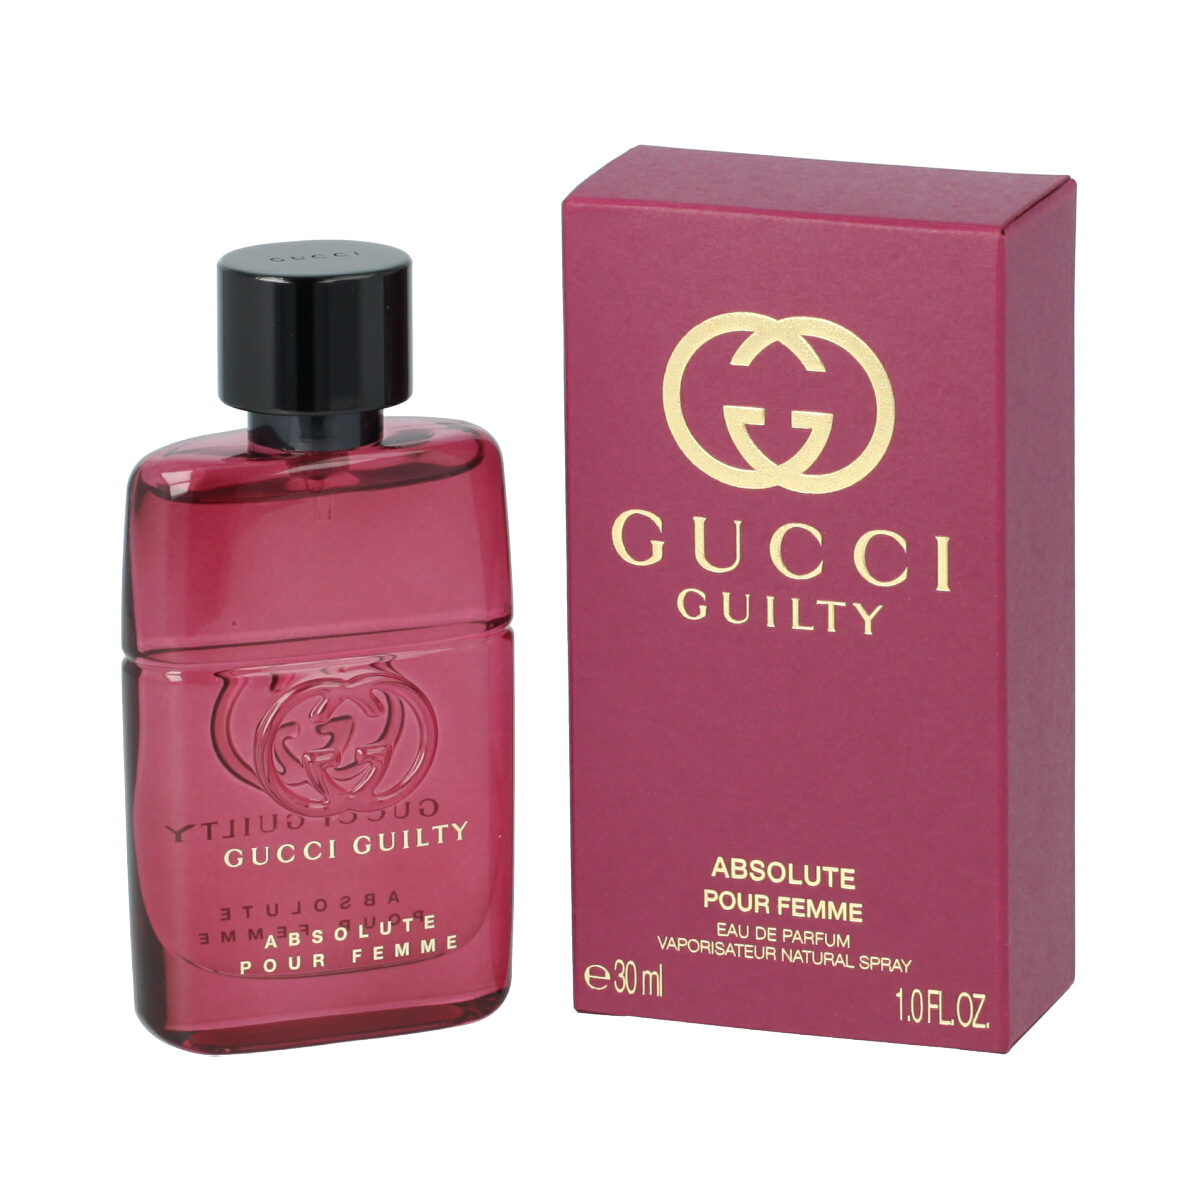 Gucci guilty absolute pour